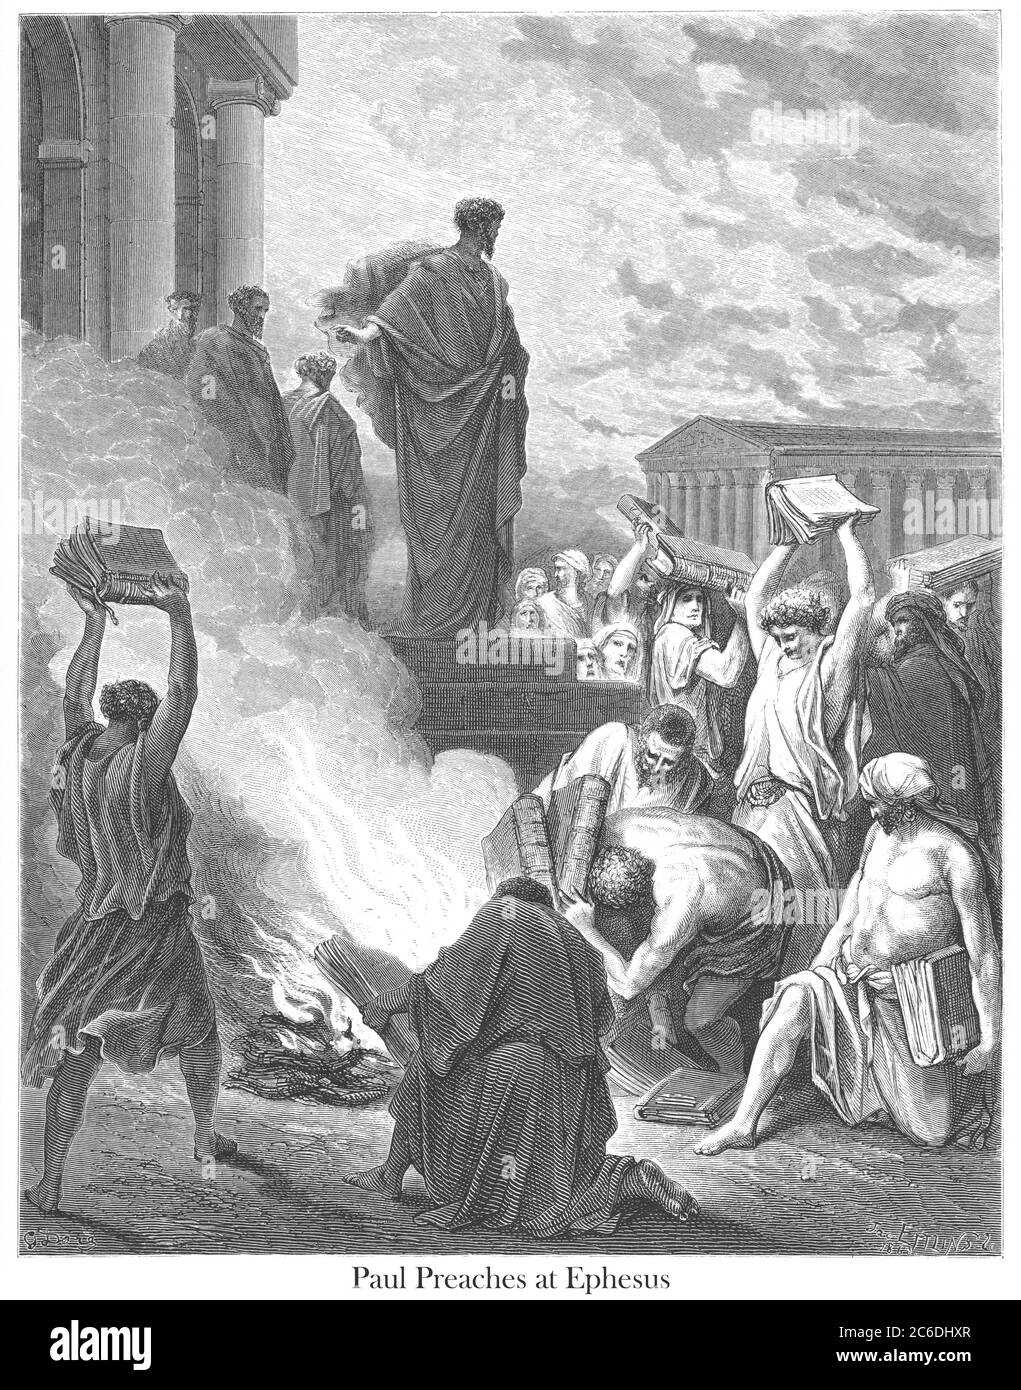 St. Paul at Ephesus [Acts 19:19] From the book 'Bible Gallery' Illustrated by Gustave Dore with Memoir of Dore and Descriptive Letter-press by Talbot W. Chambers D.D. Published by Cassell & Company Limited in London and simultaneously by Mame in Tours, France in 1866 Stock Photo